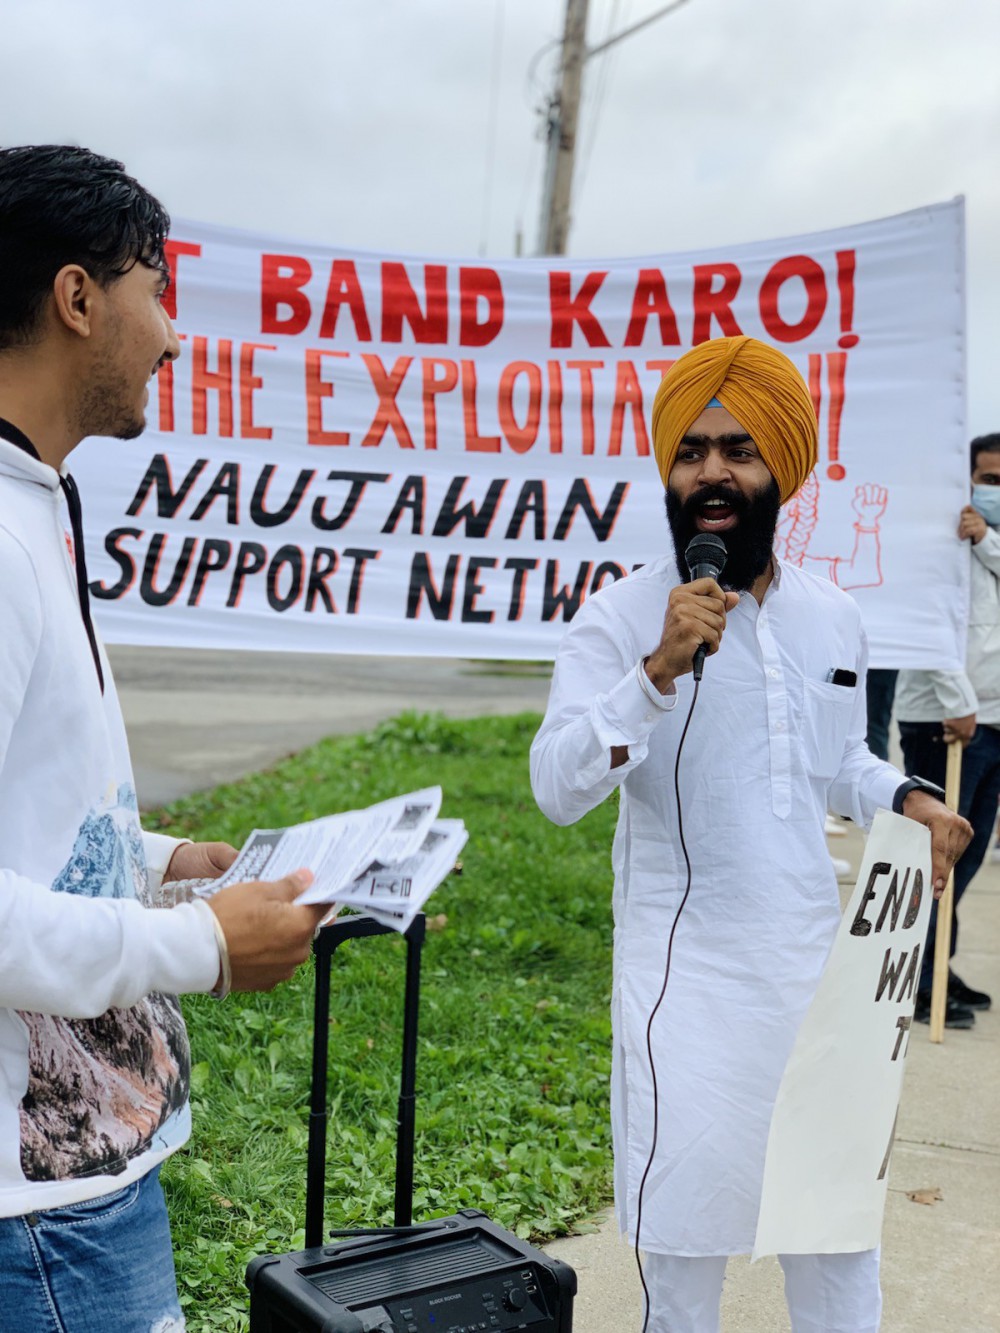 A person with a black beard, white salwar kameez, and orange turban speaks forcefully into a microphone in front of an NSN banner. To his left, partially out of frame, Rohit – who has short black hair and a white sweater – pauses to listen.